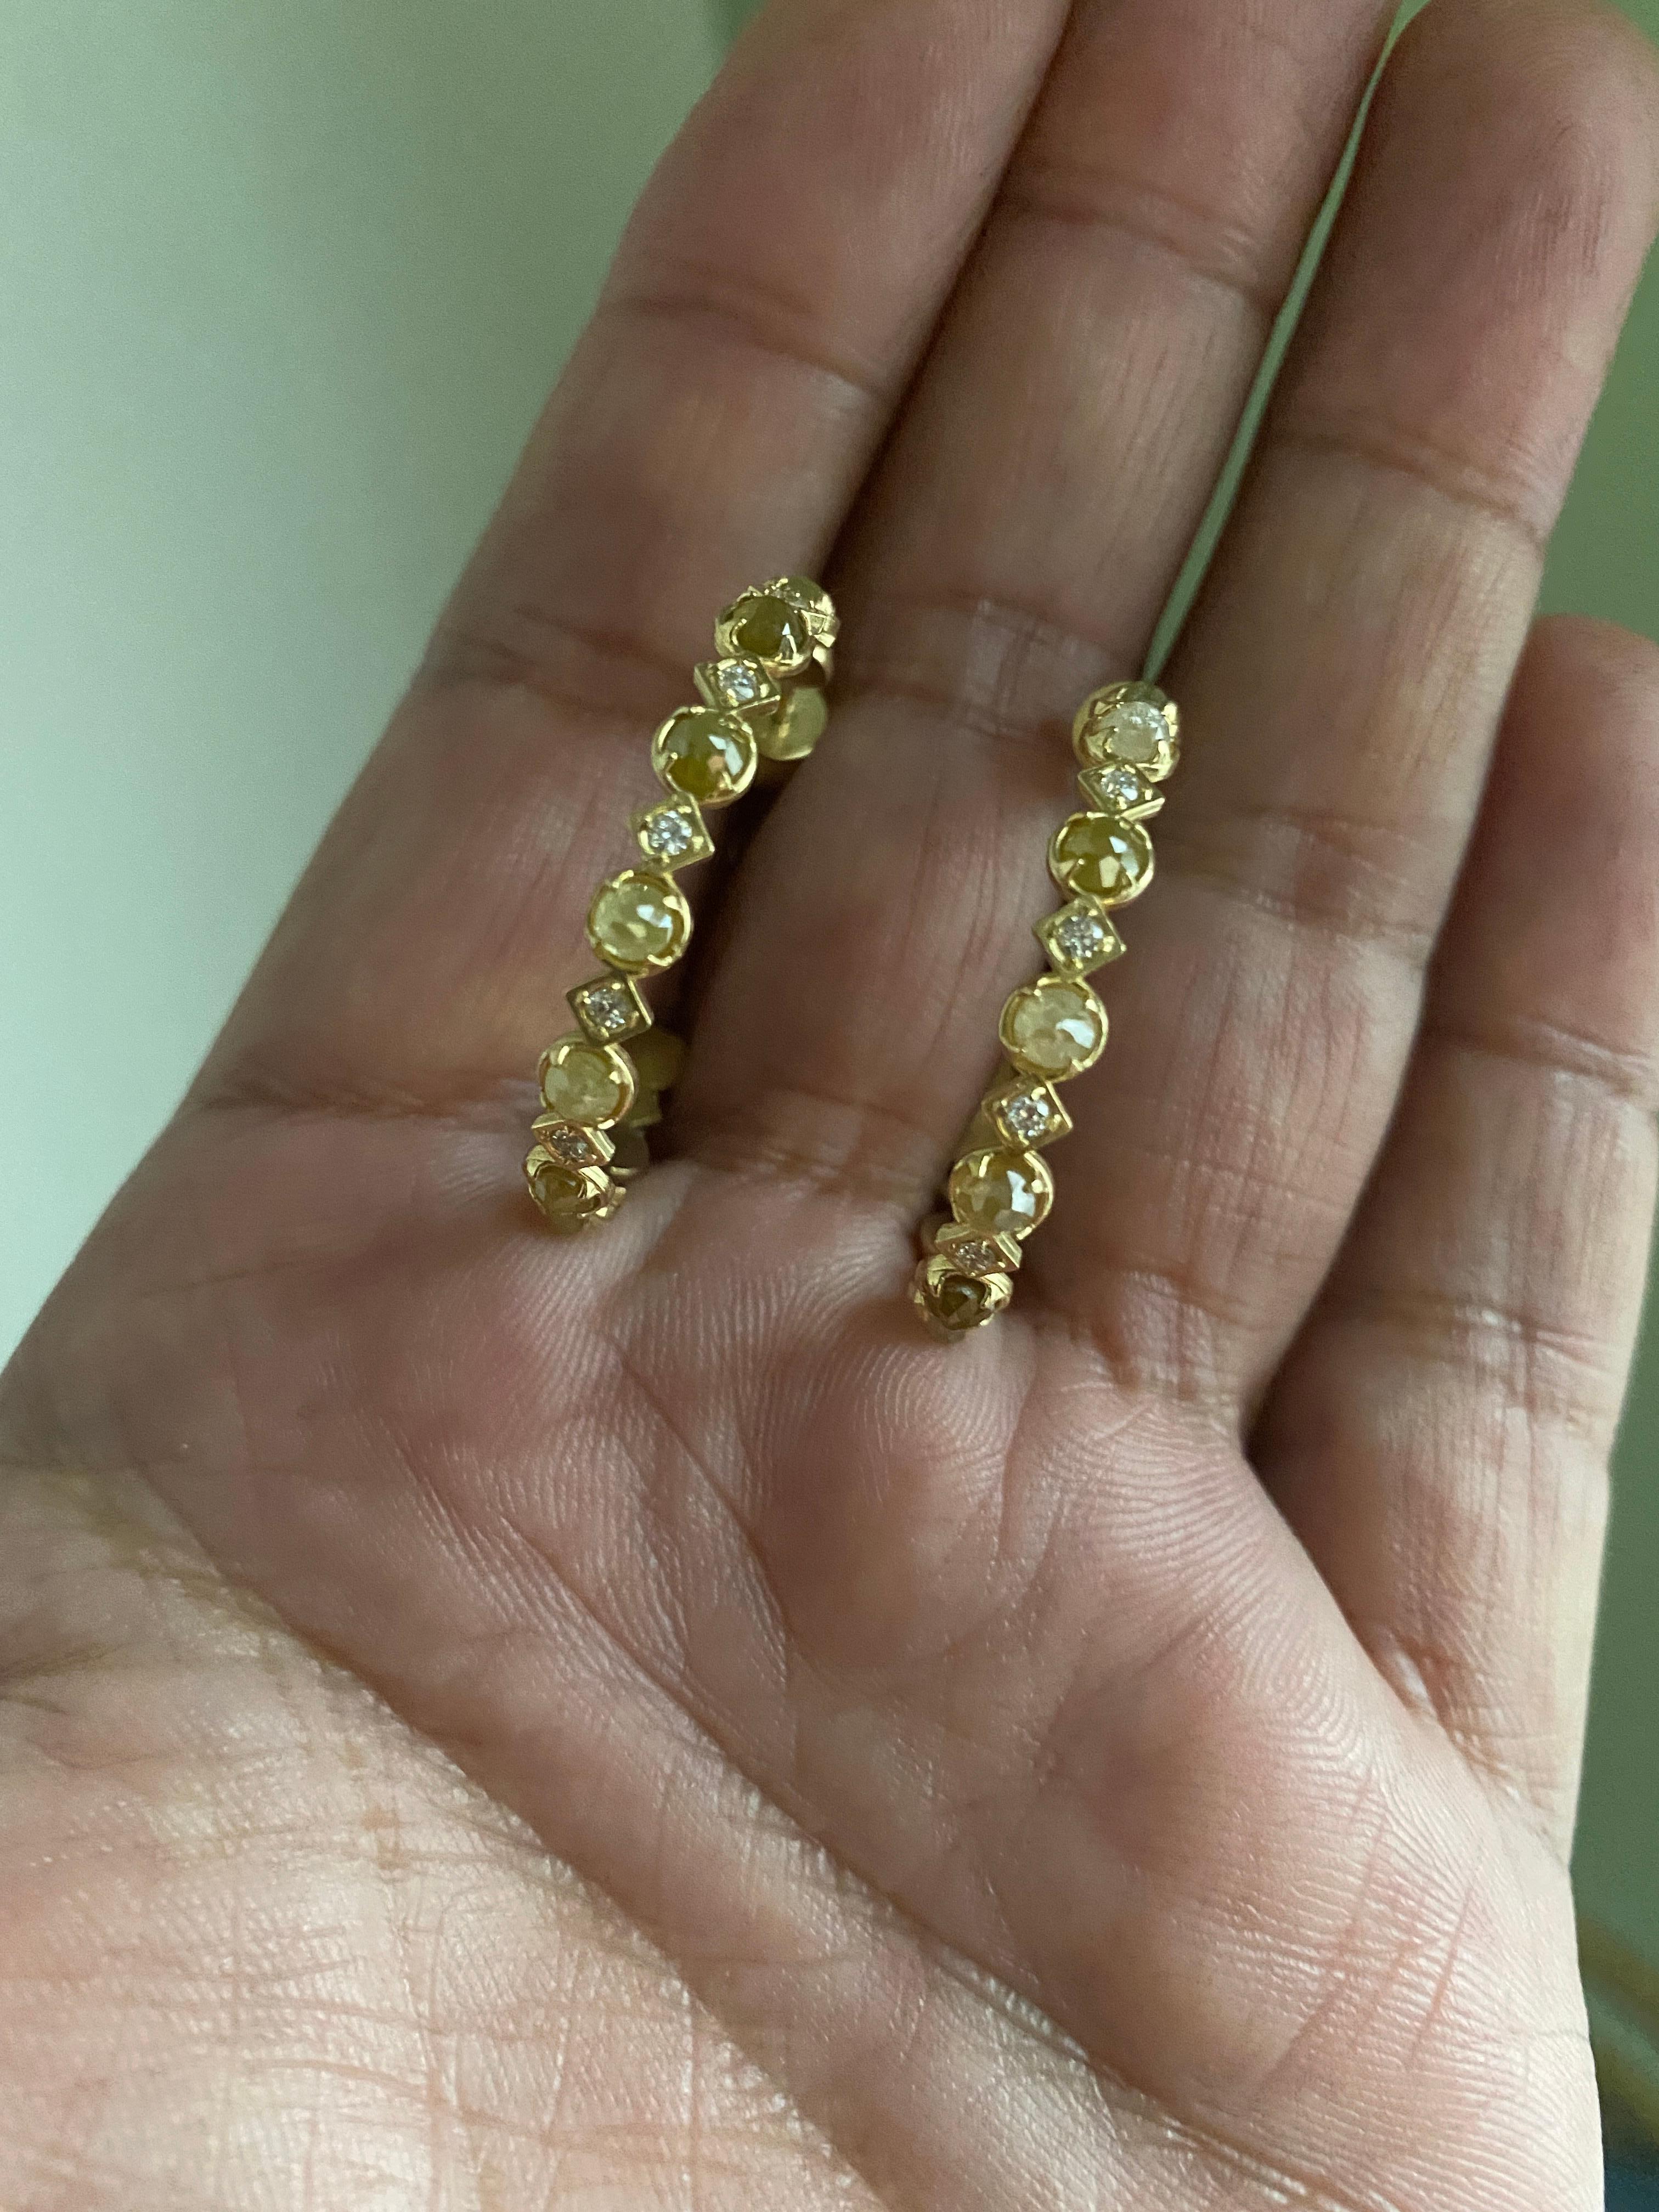 Natural Color and White Rose cut Diamond Hoop Earrings set in 18k Yellow gold designed by Amyn The Jeweler

20 Rose Cut Diamonds 3.00cts. 18 White Diamonds 0.36cts. Total Diamond weight 3.36cts.

Made passionately in Los Angeles

Model:ERRSRSRUSHOOP
